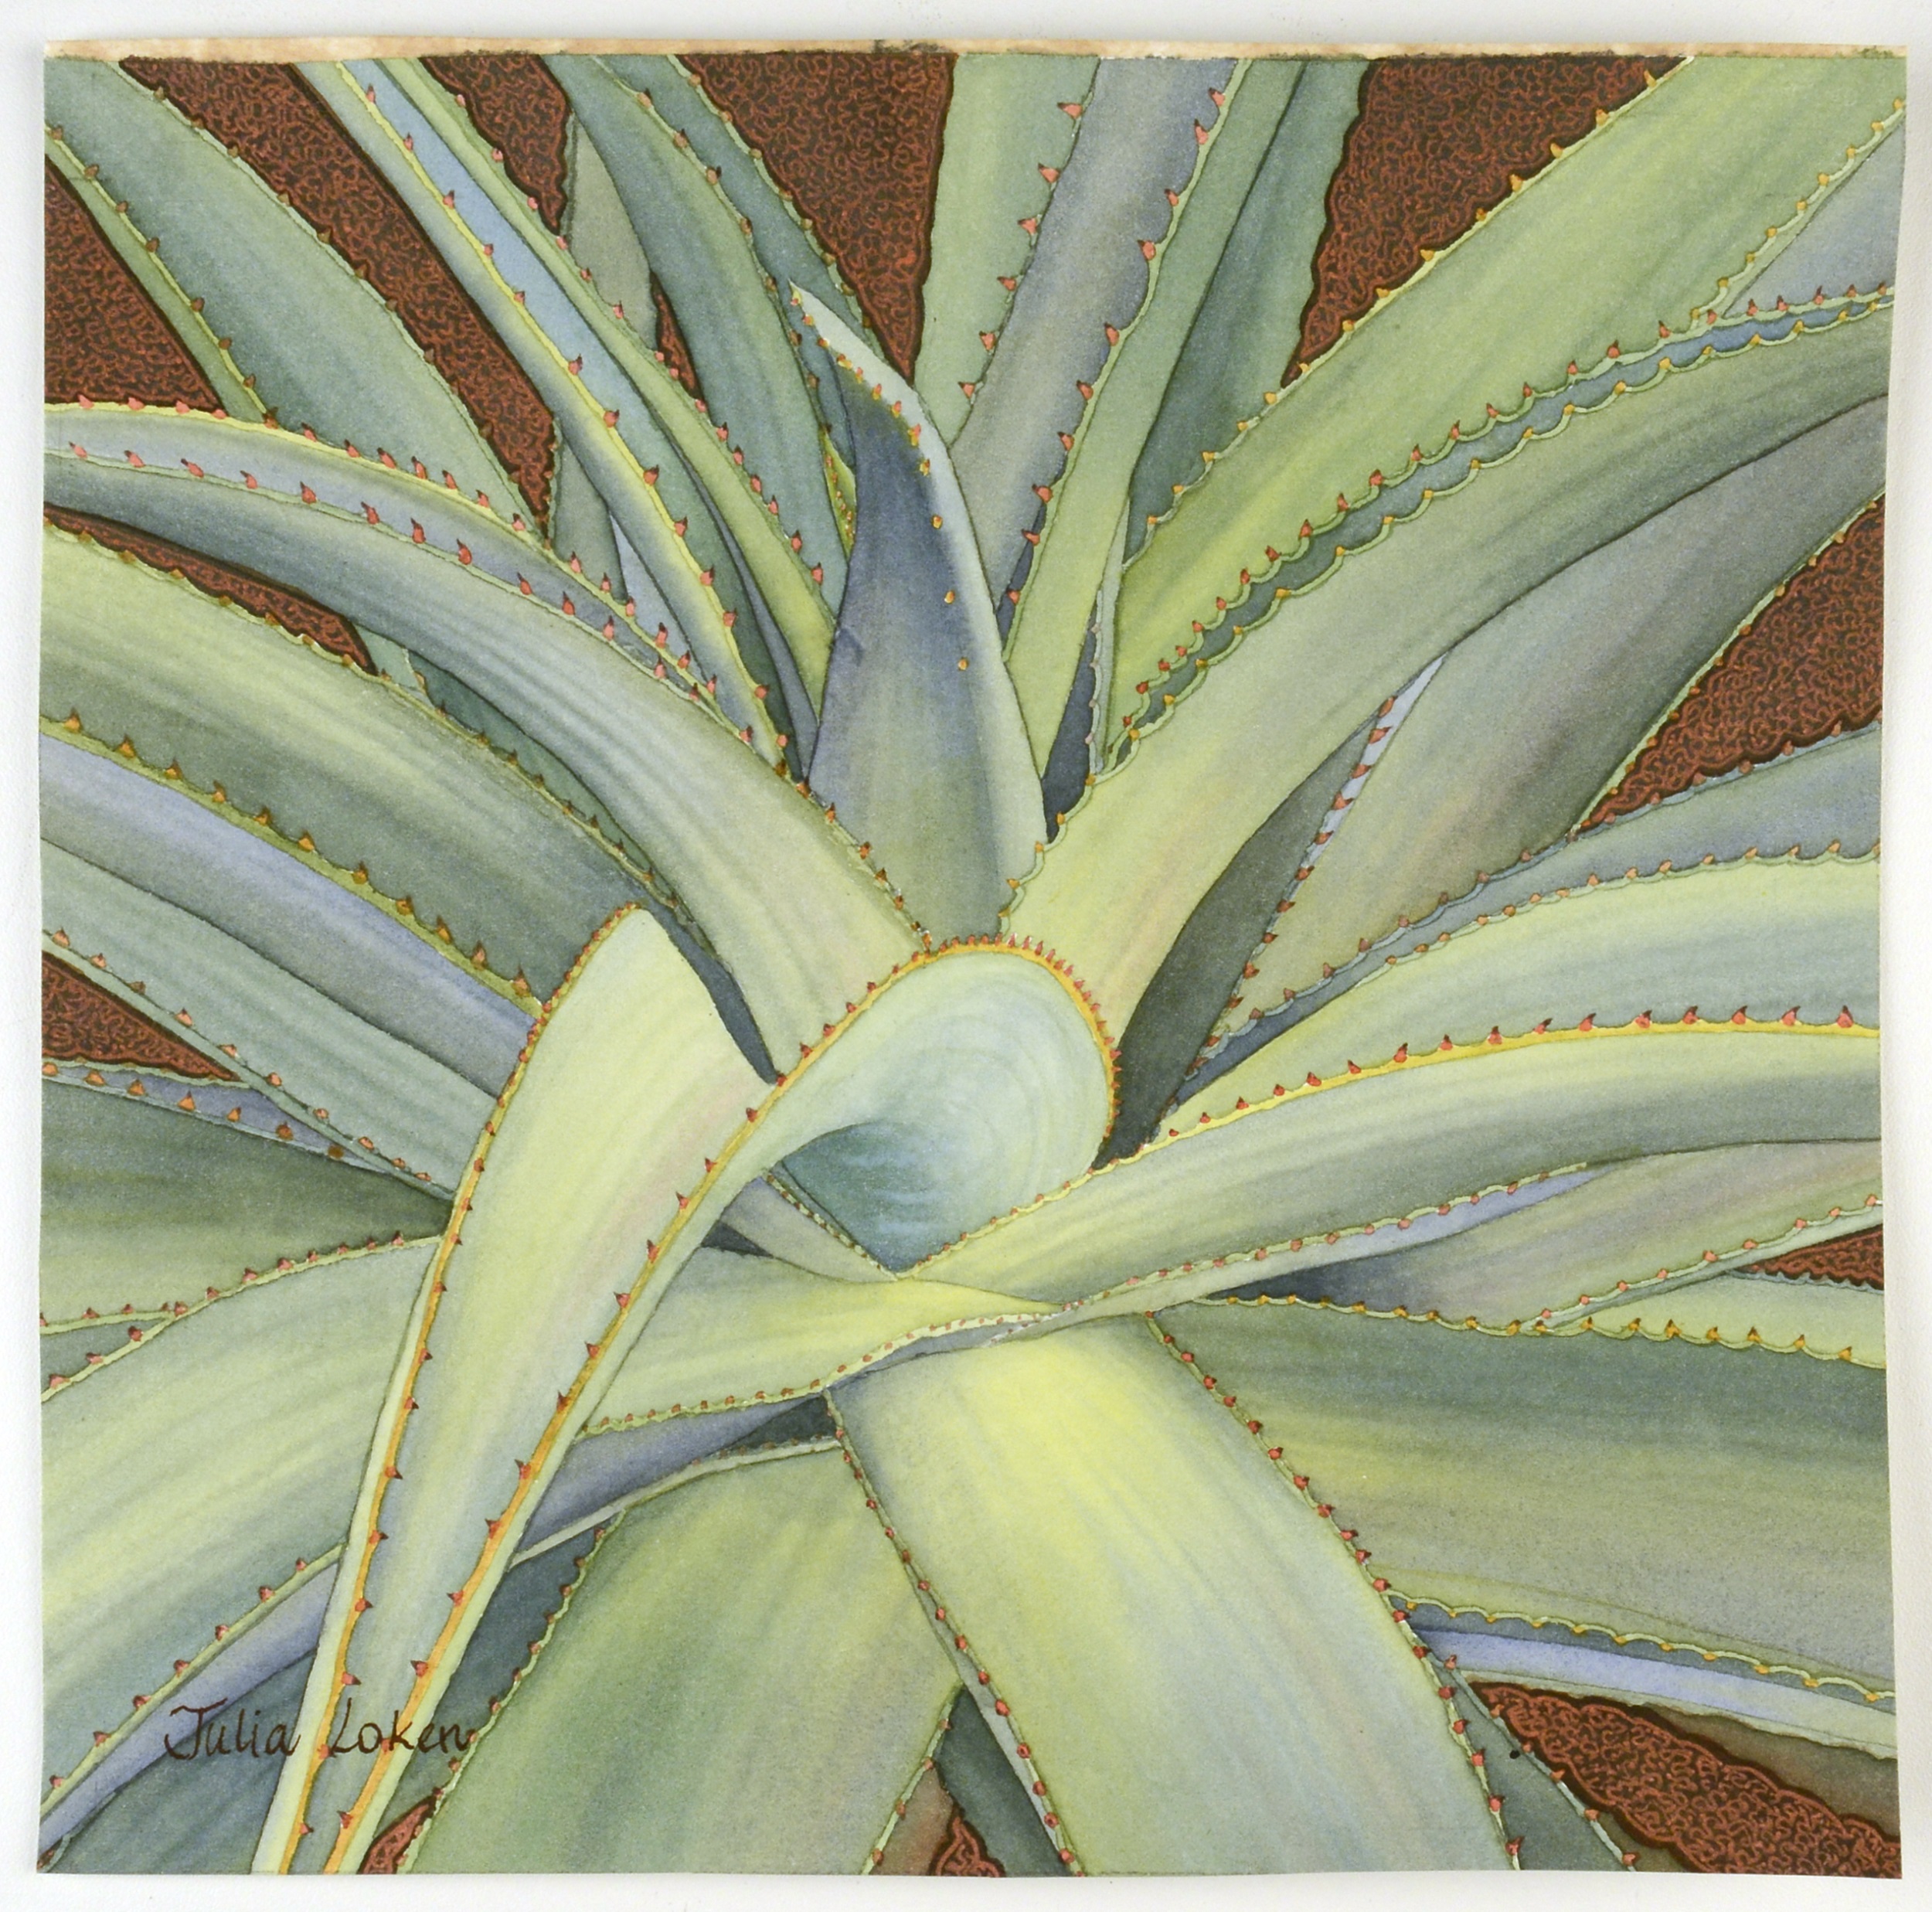 
		                					Julia Loken		                																	
																											<i>Agave II,</i>  
																																																					watercolor on paper, 
																																								8 3/4 x 8 3/4 inches 
																								
		                				